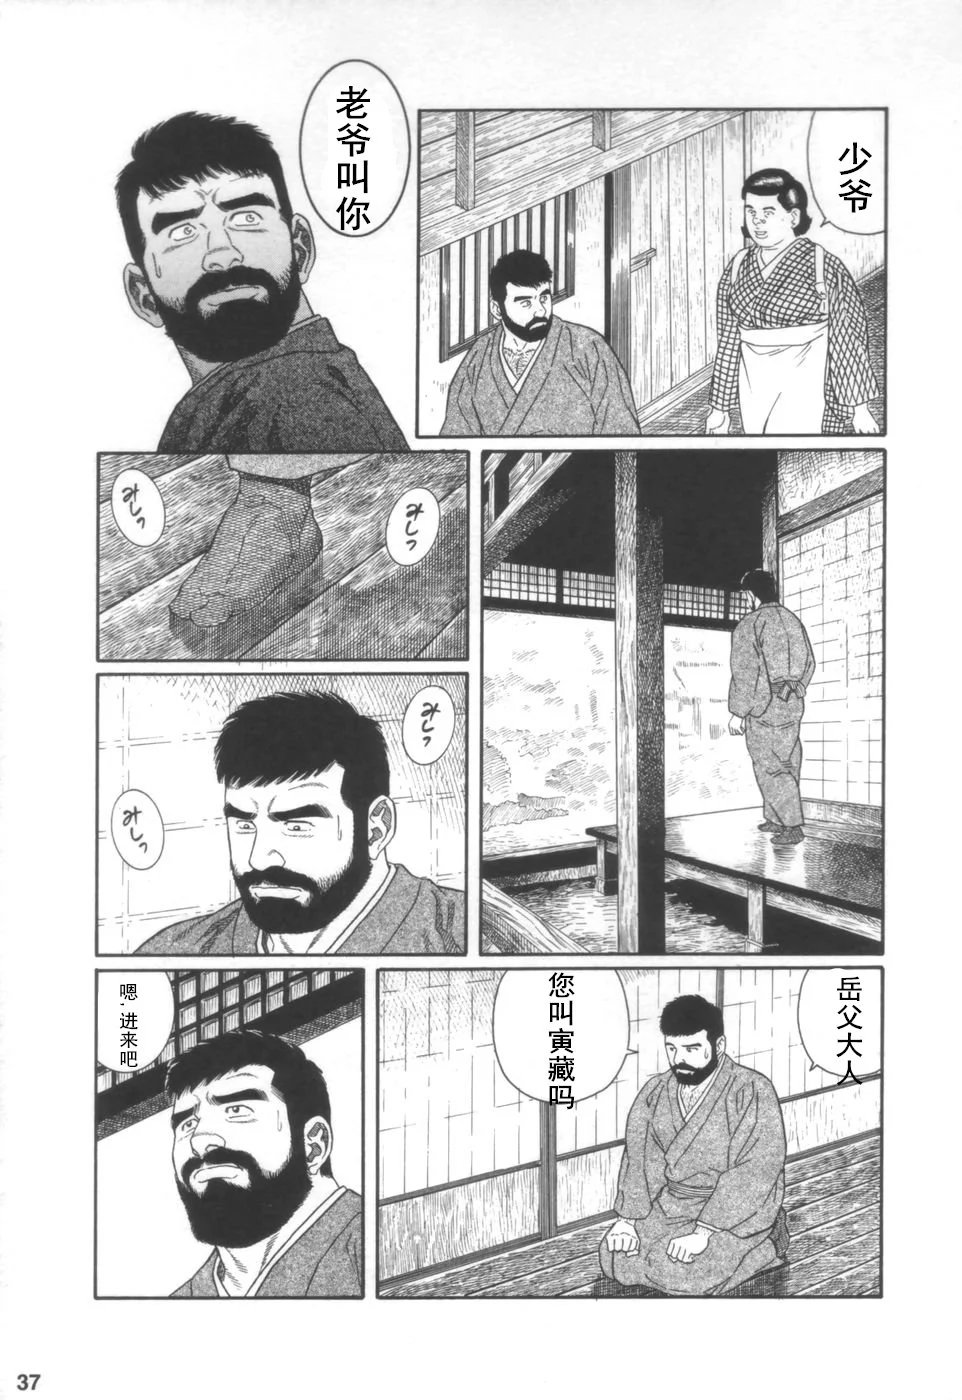 [Tagame Gengoroh] Gedou no Ie Joukan | 邪道之家 Vol. 1 Ch.1 [Chinese] page 36 full